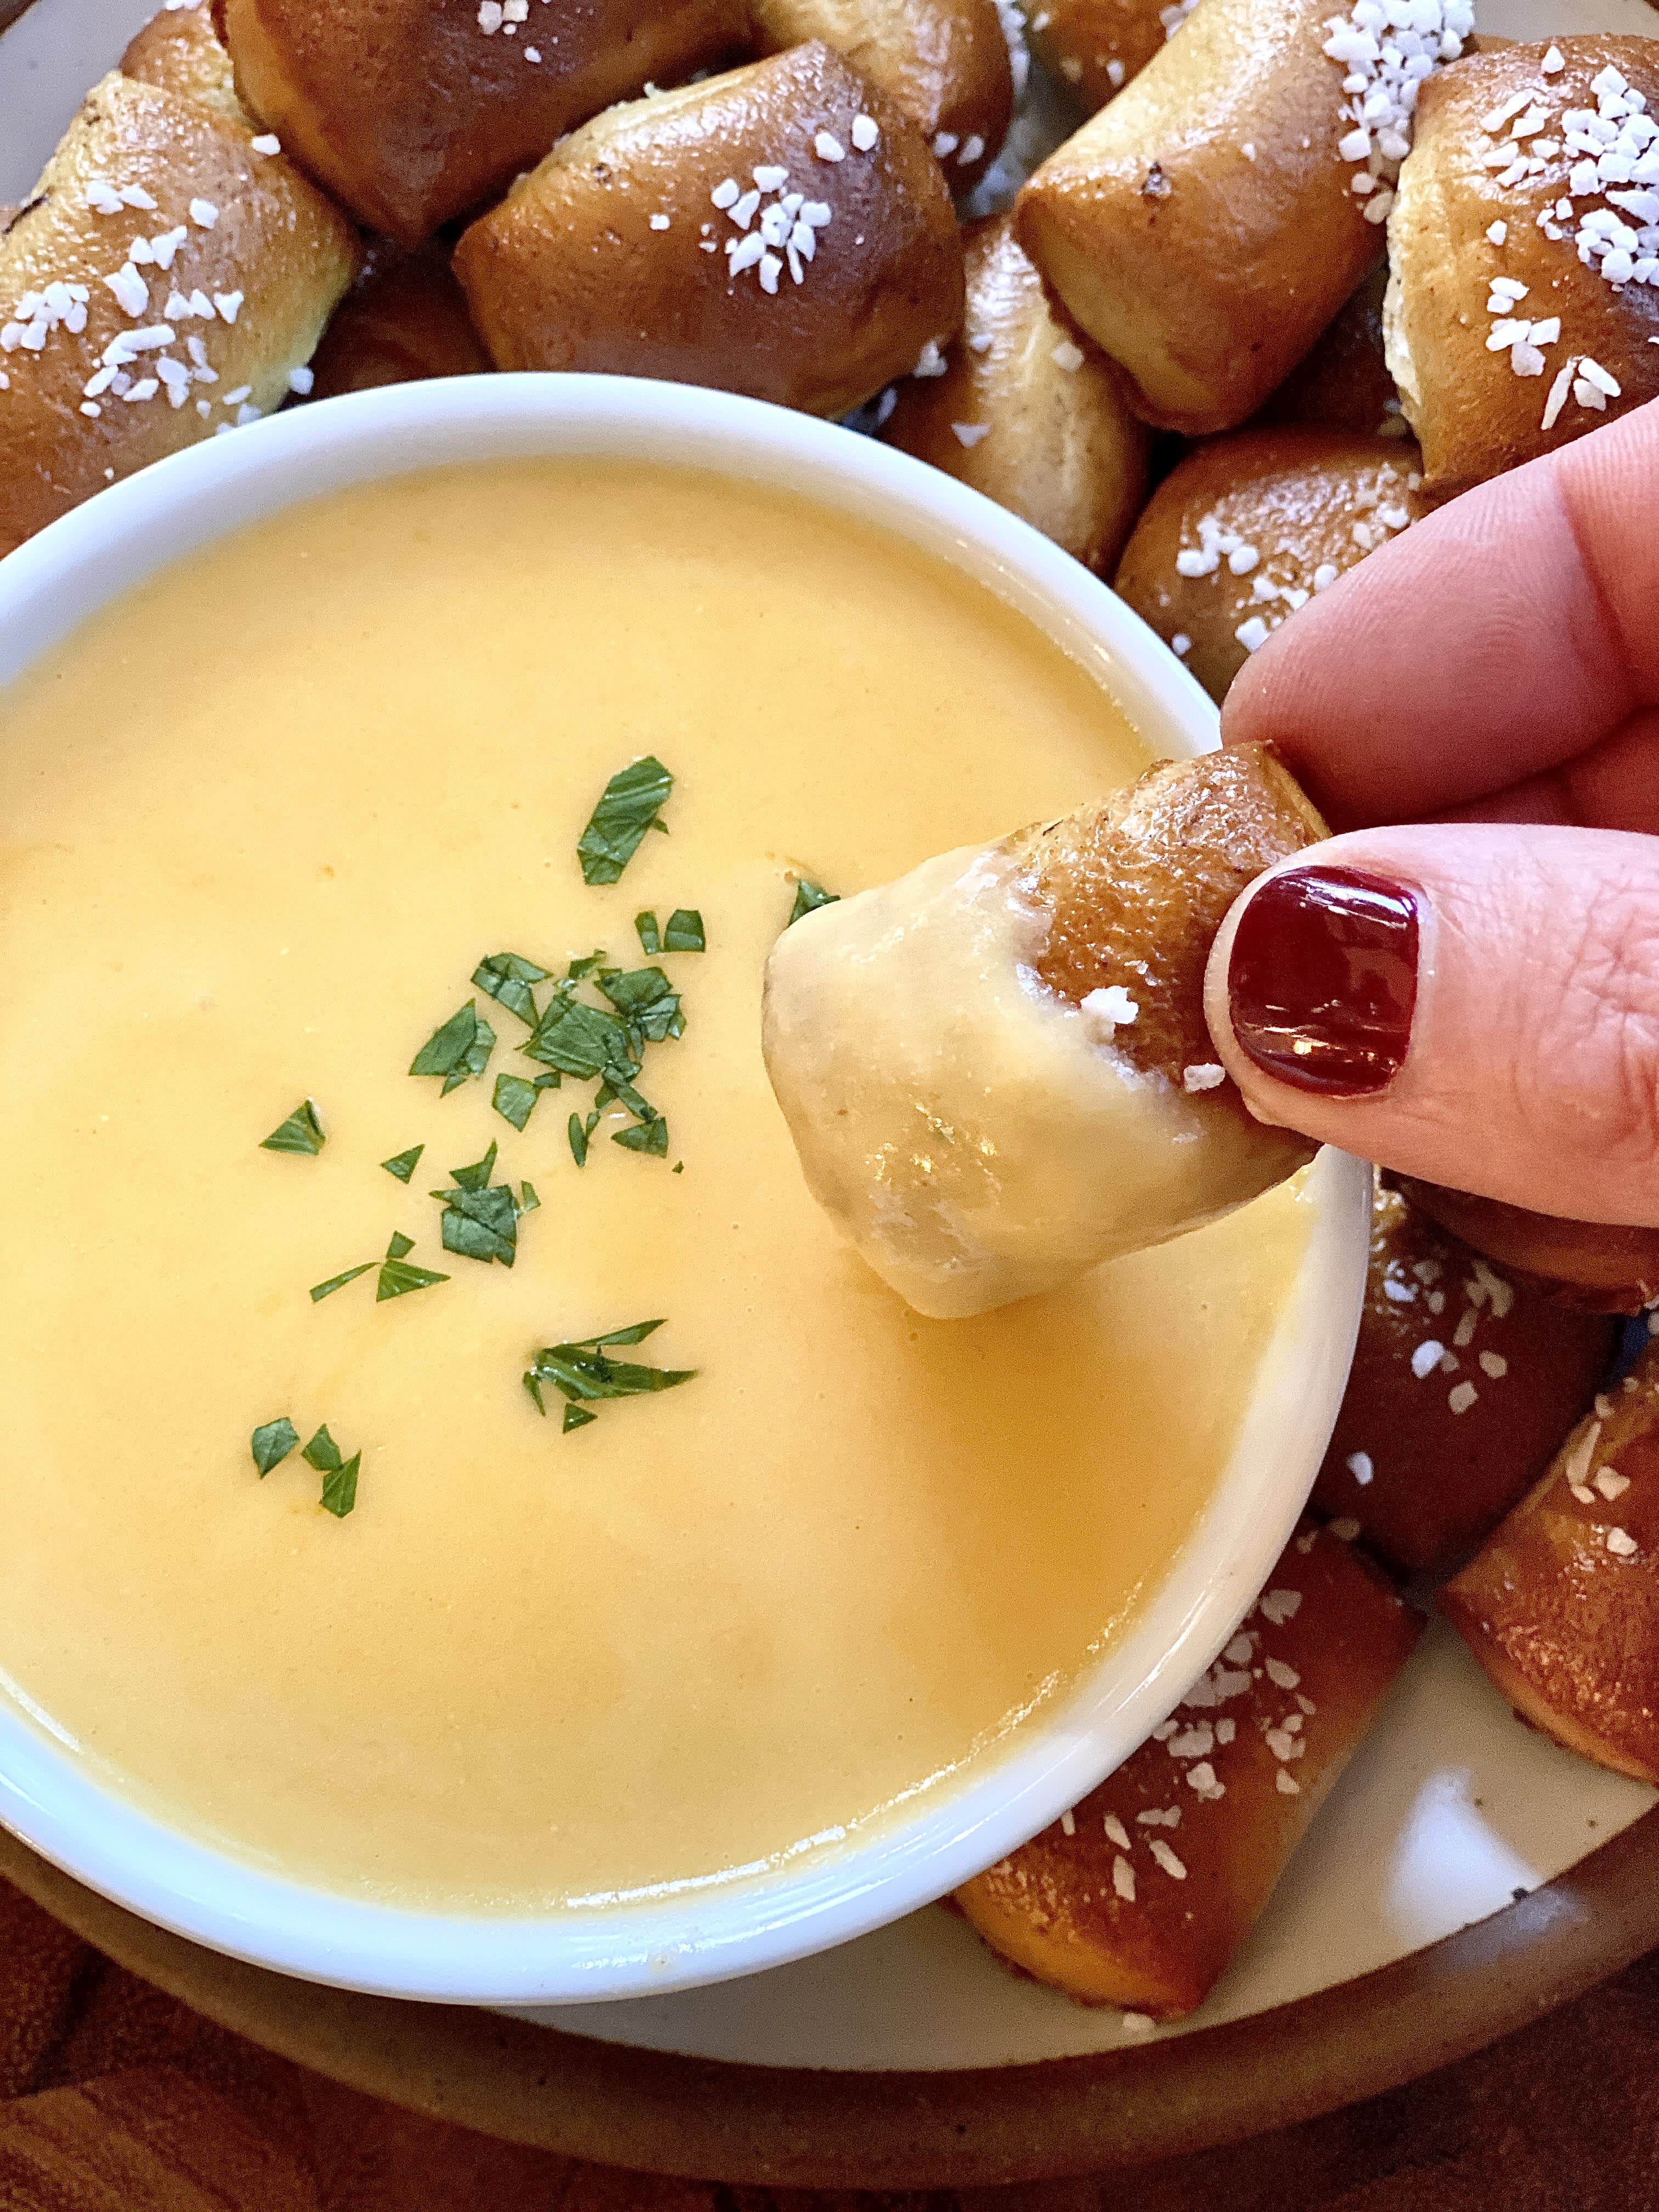 Quick and Easy Beer Cheese Dip for Pretzels - My Forking Life